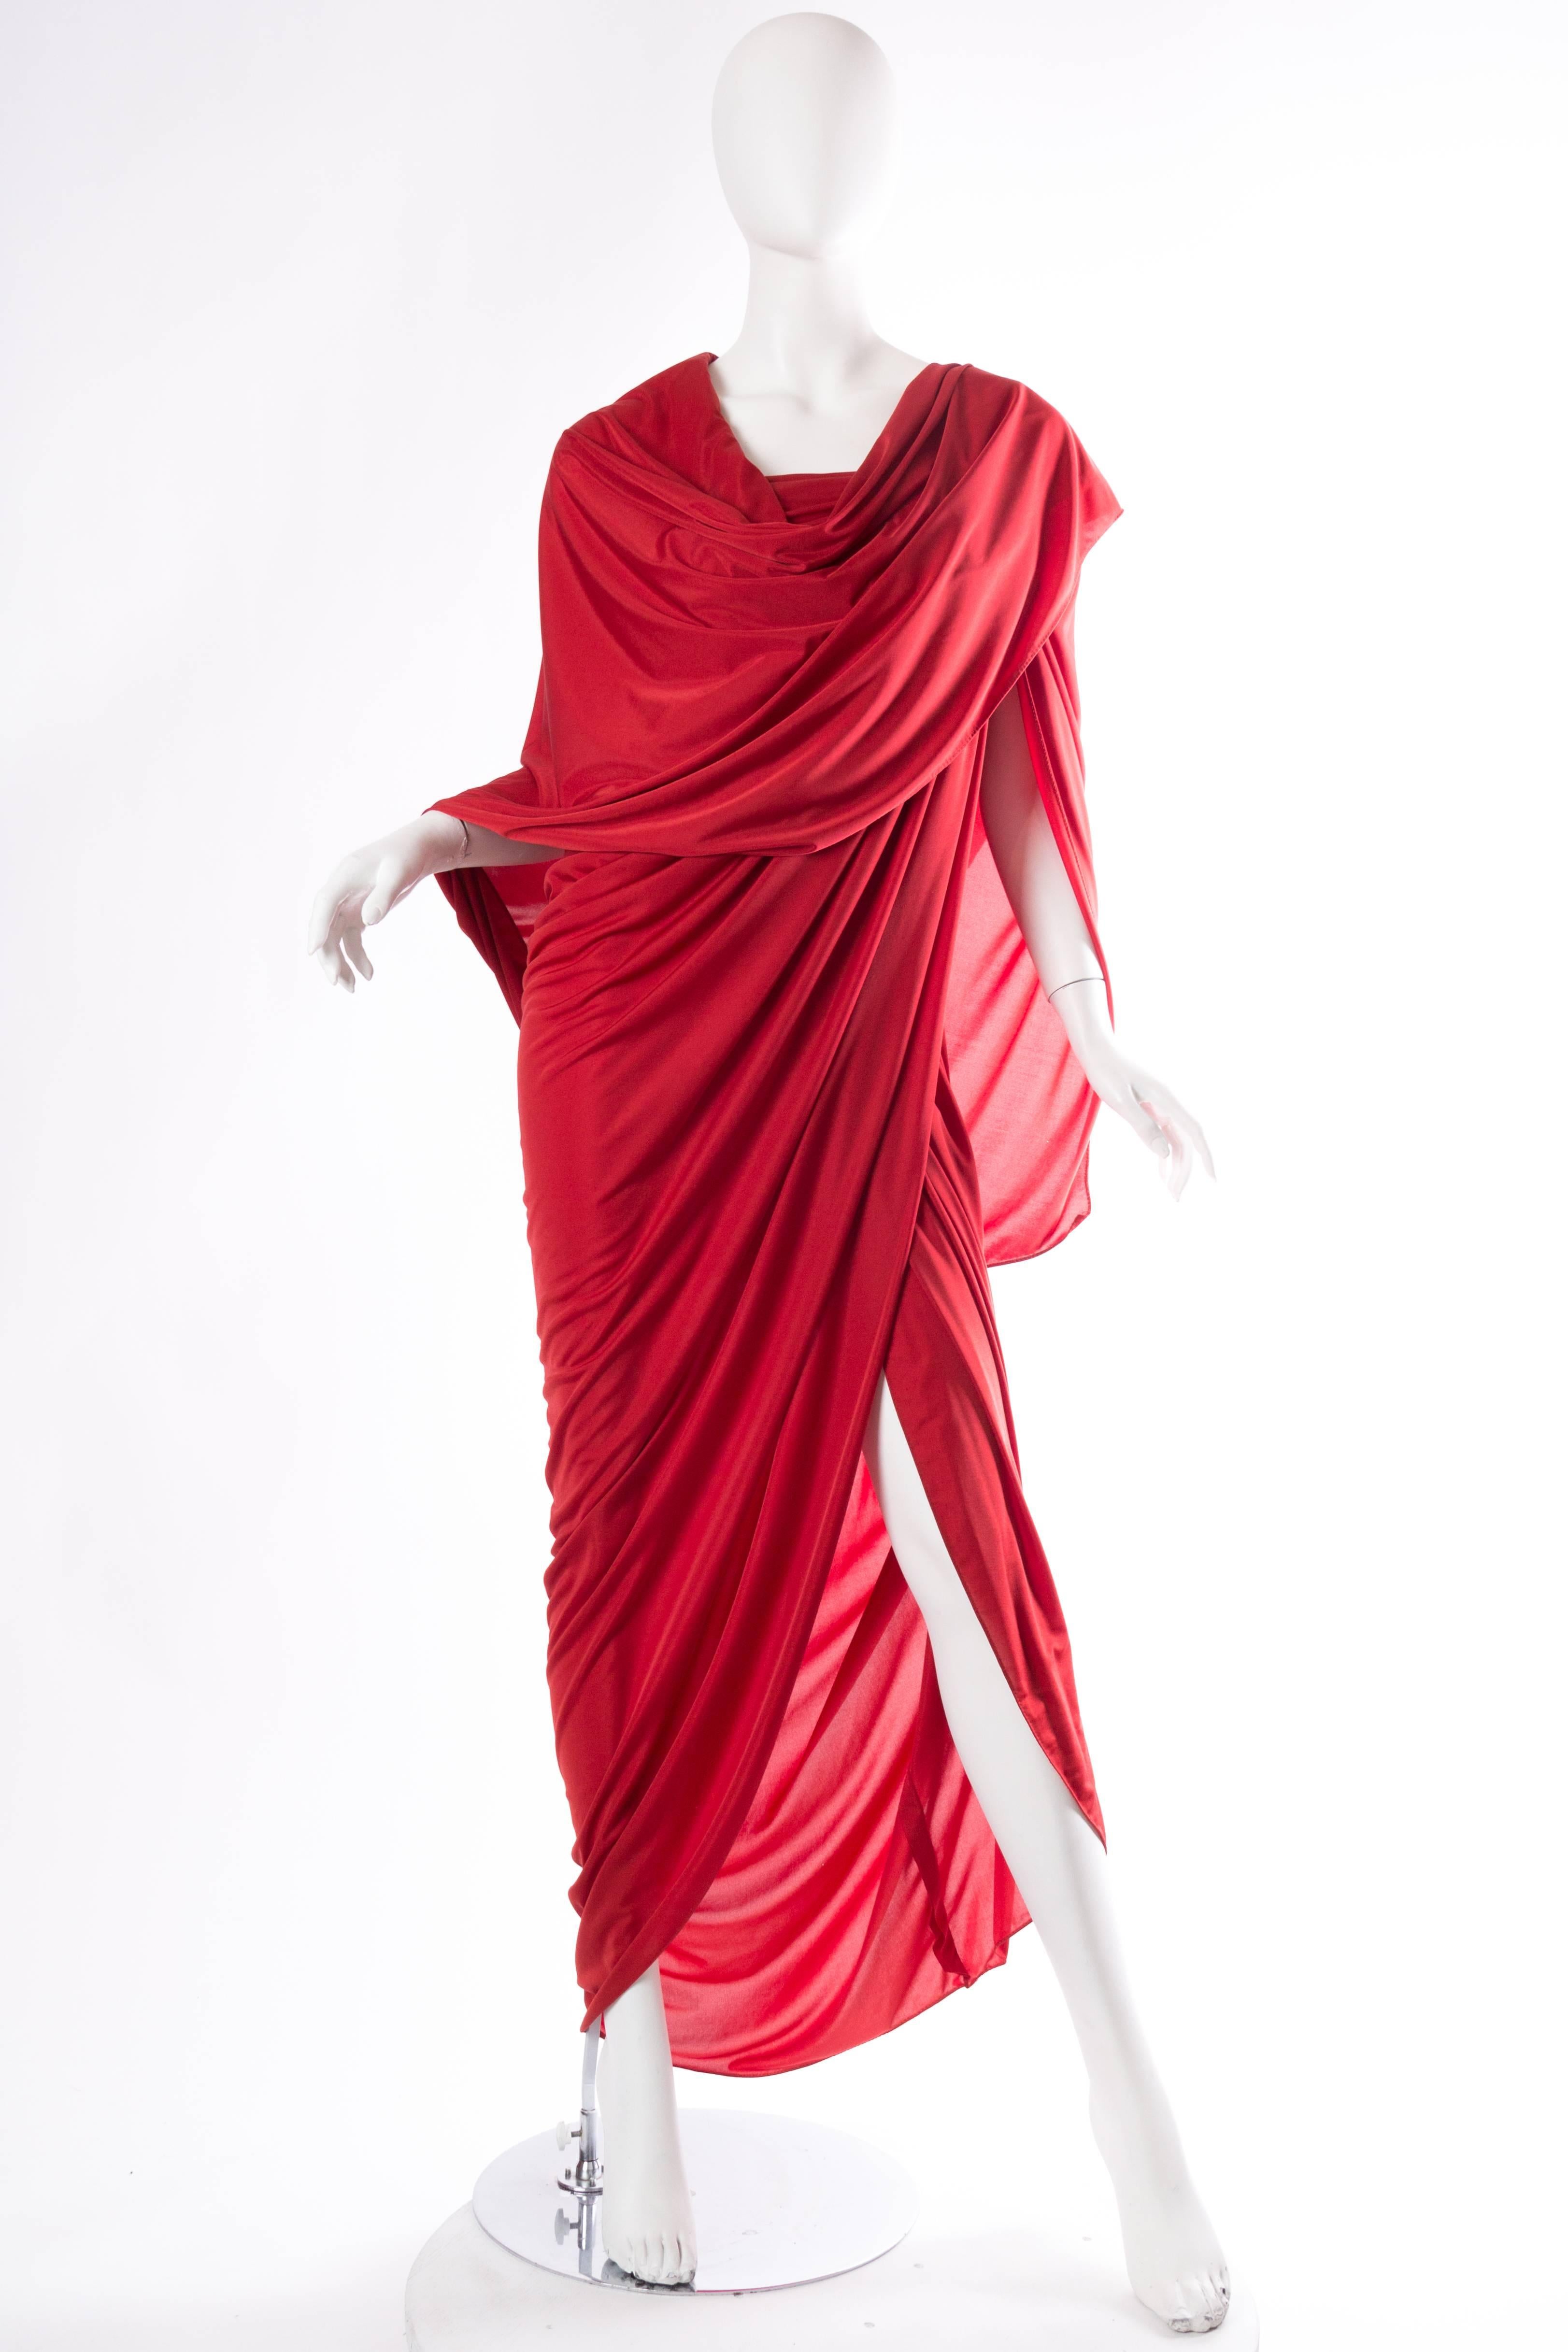 Chiffon weight synthetic jersey wraps around the body in the most figure flattering of ways. The dress is cut asymmetrically with straps at one shoulder and wrapped design which allows for a very high or not so high slit. There is a fantastic shawl